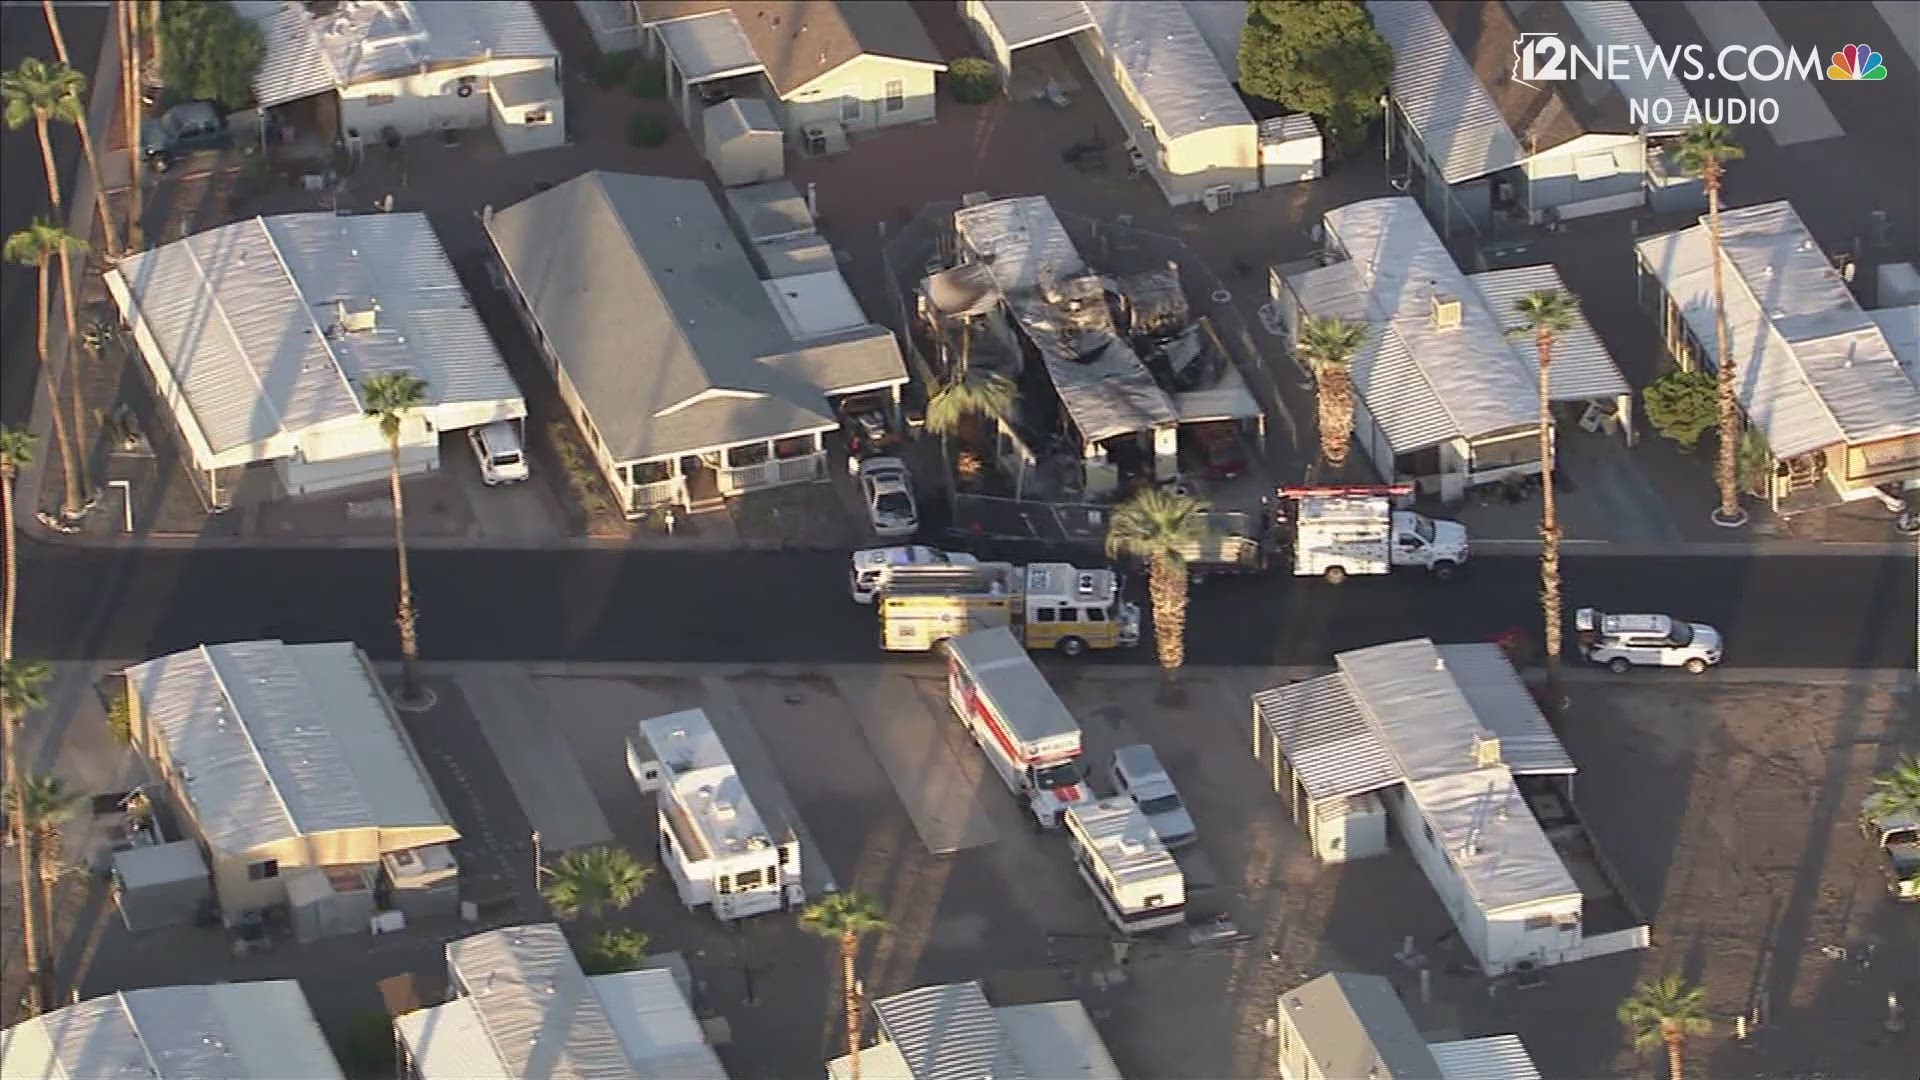 Sky 12 was over the aftermath of a trailer fire in Glendale on Thursday. Crews continue to investigate the scene near 51st and Glendale avenues.